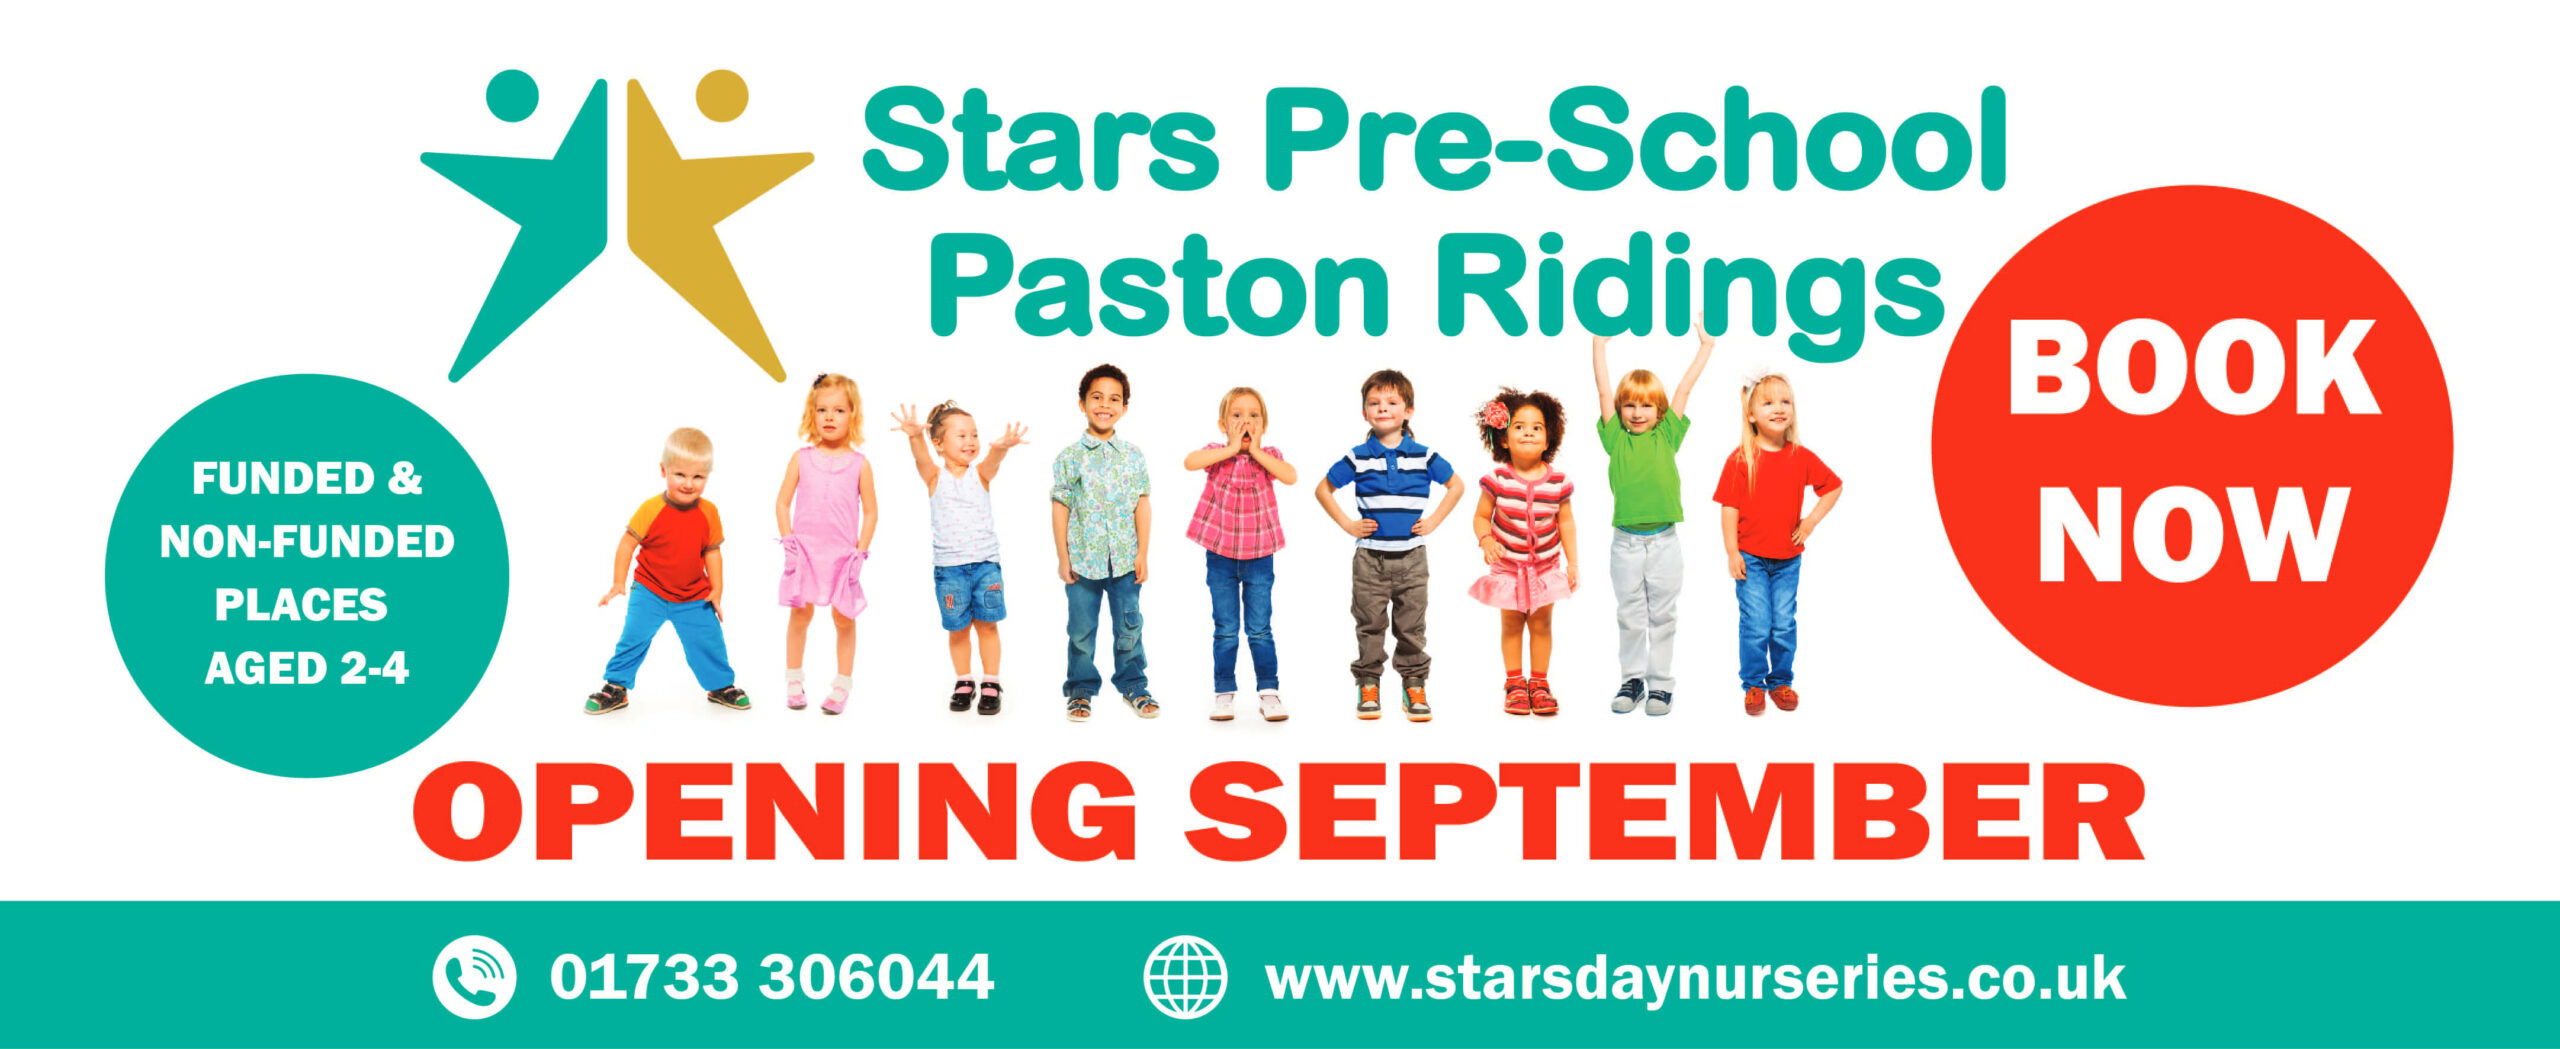 Opening information for new Stars Pre-School Paston Ridings